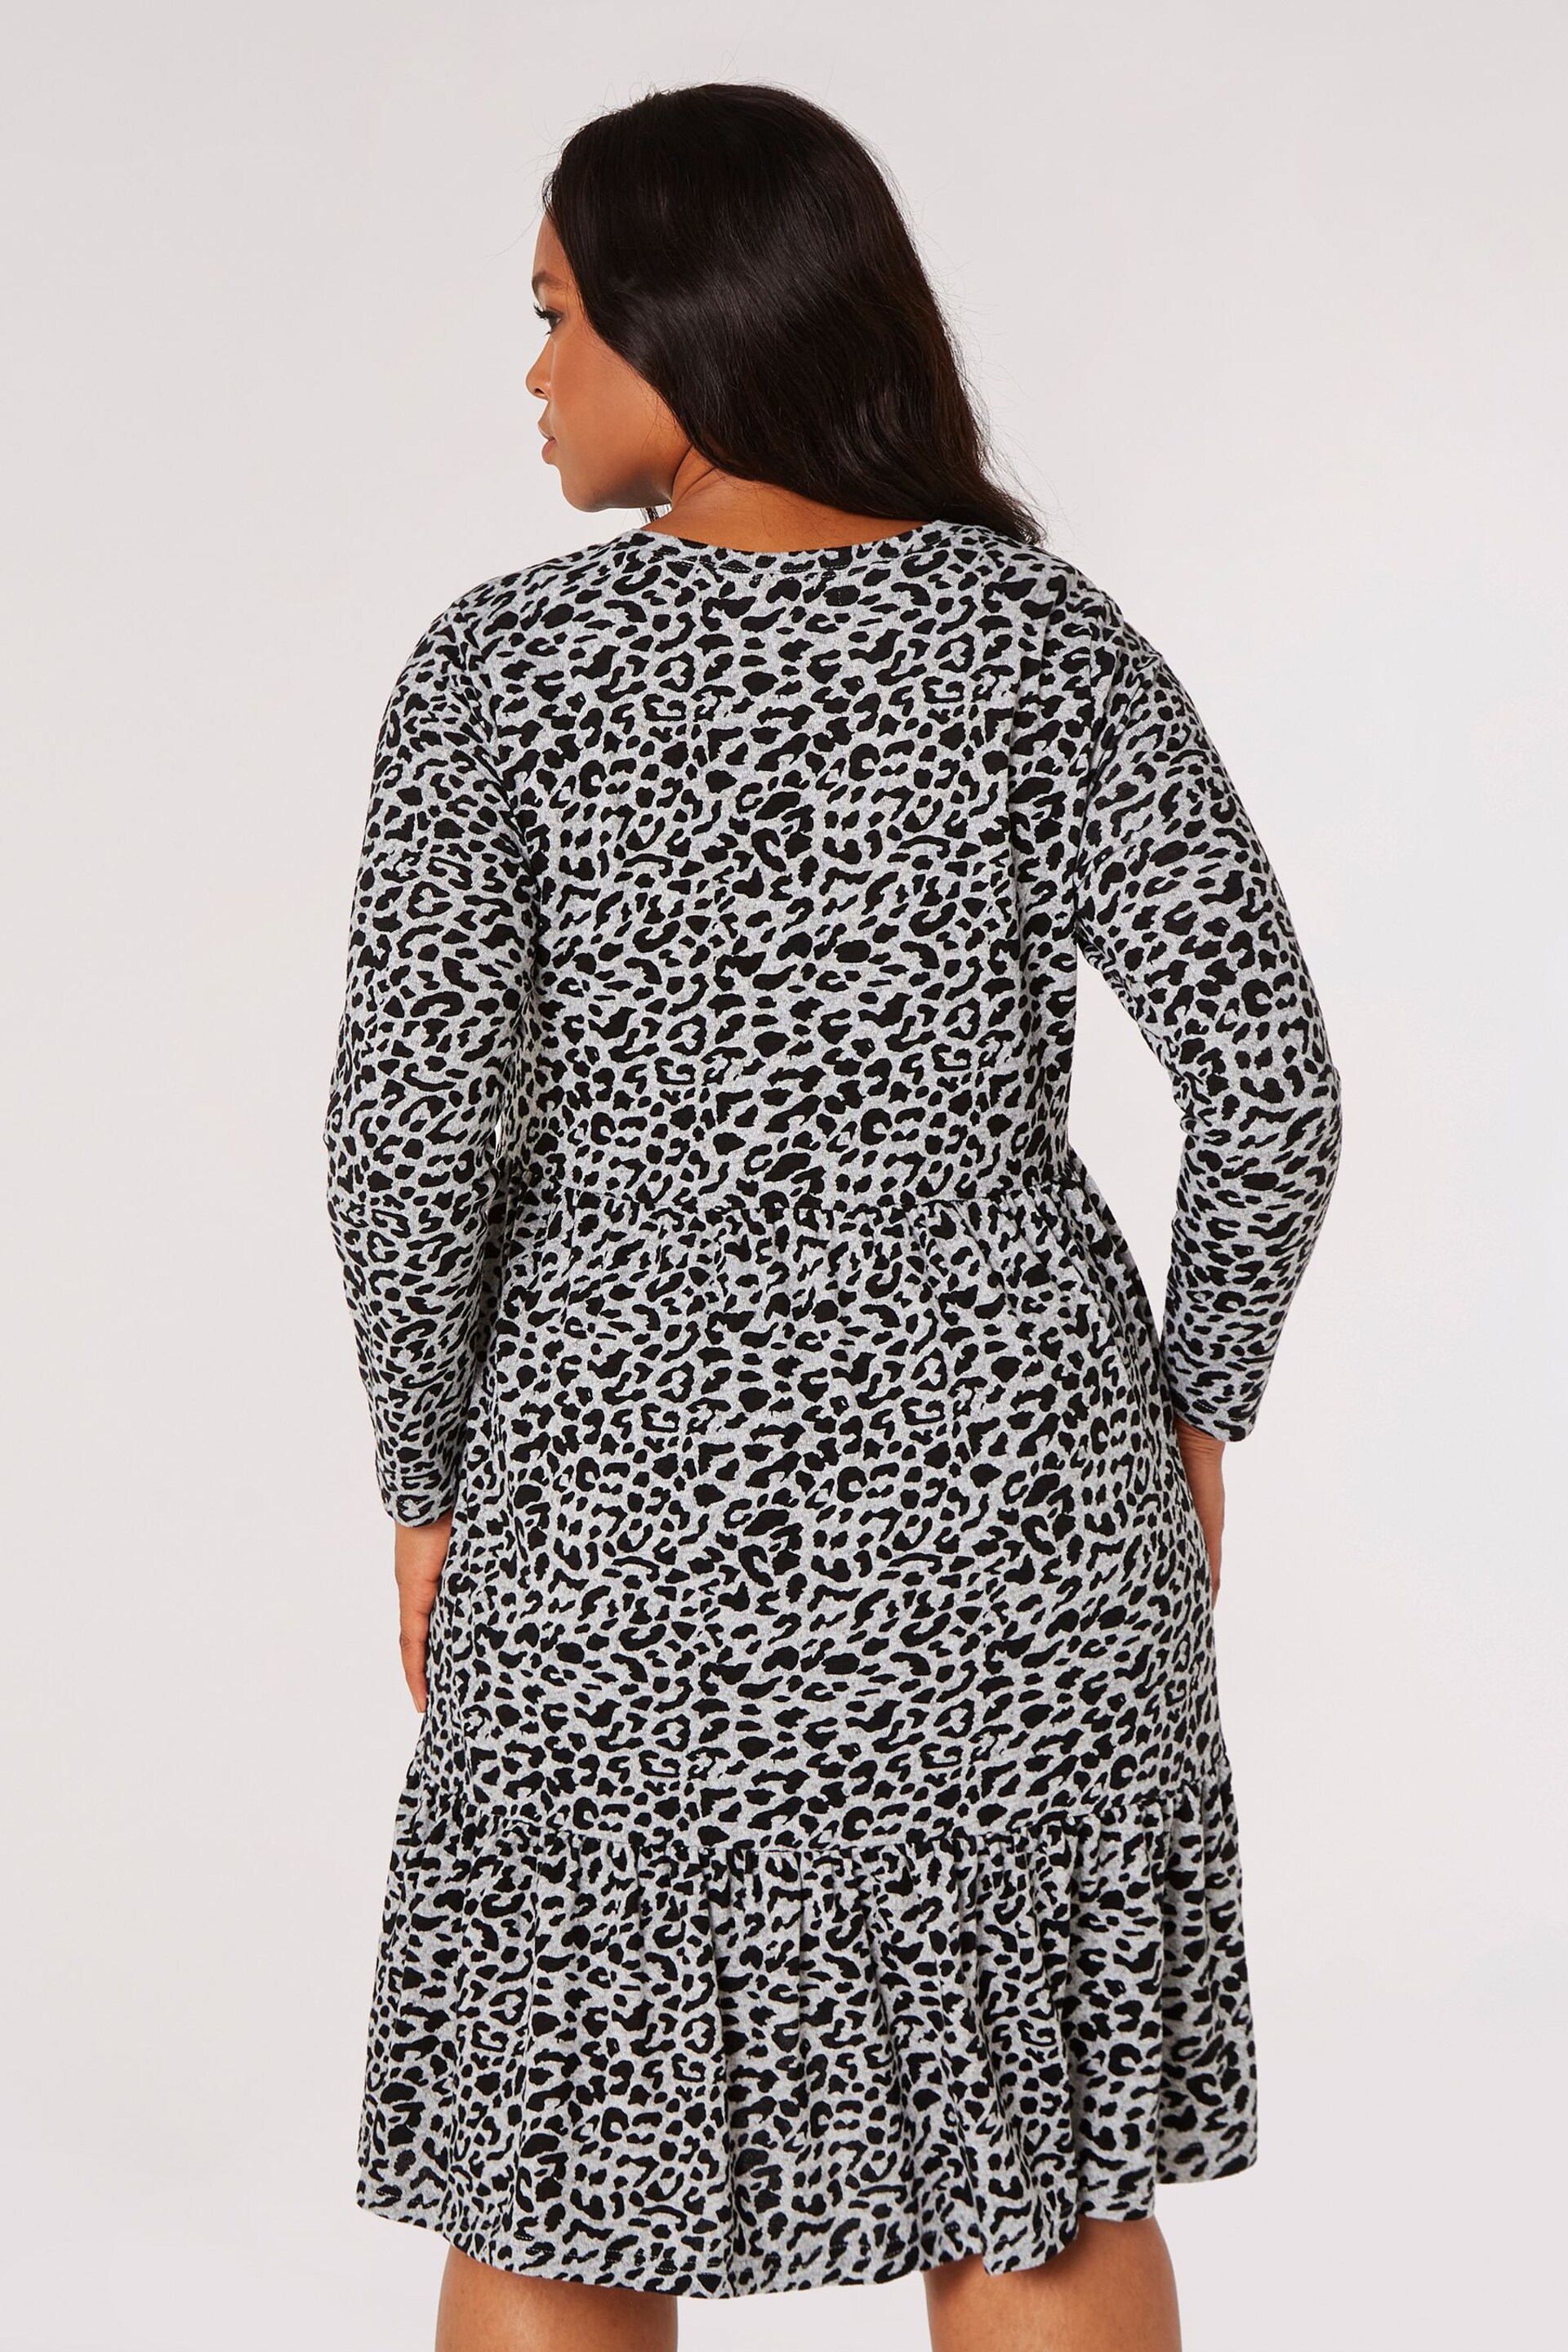 Apricot Grey Leopard Soft Touch Tiered Dress - Image 2 of 4